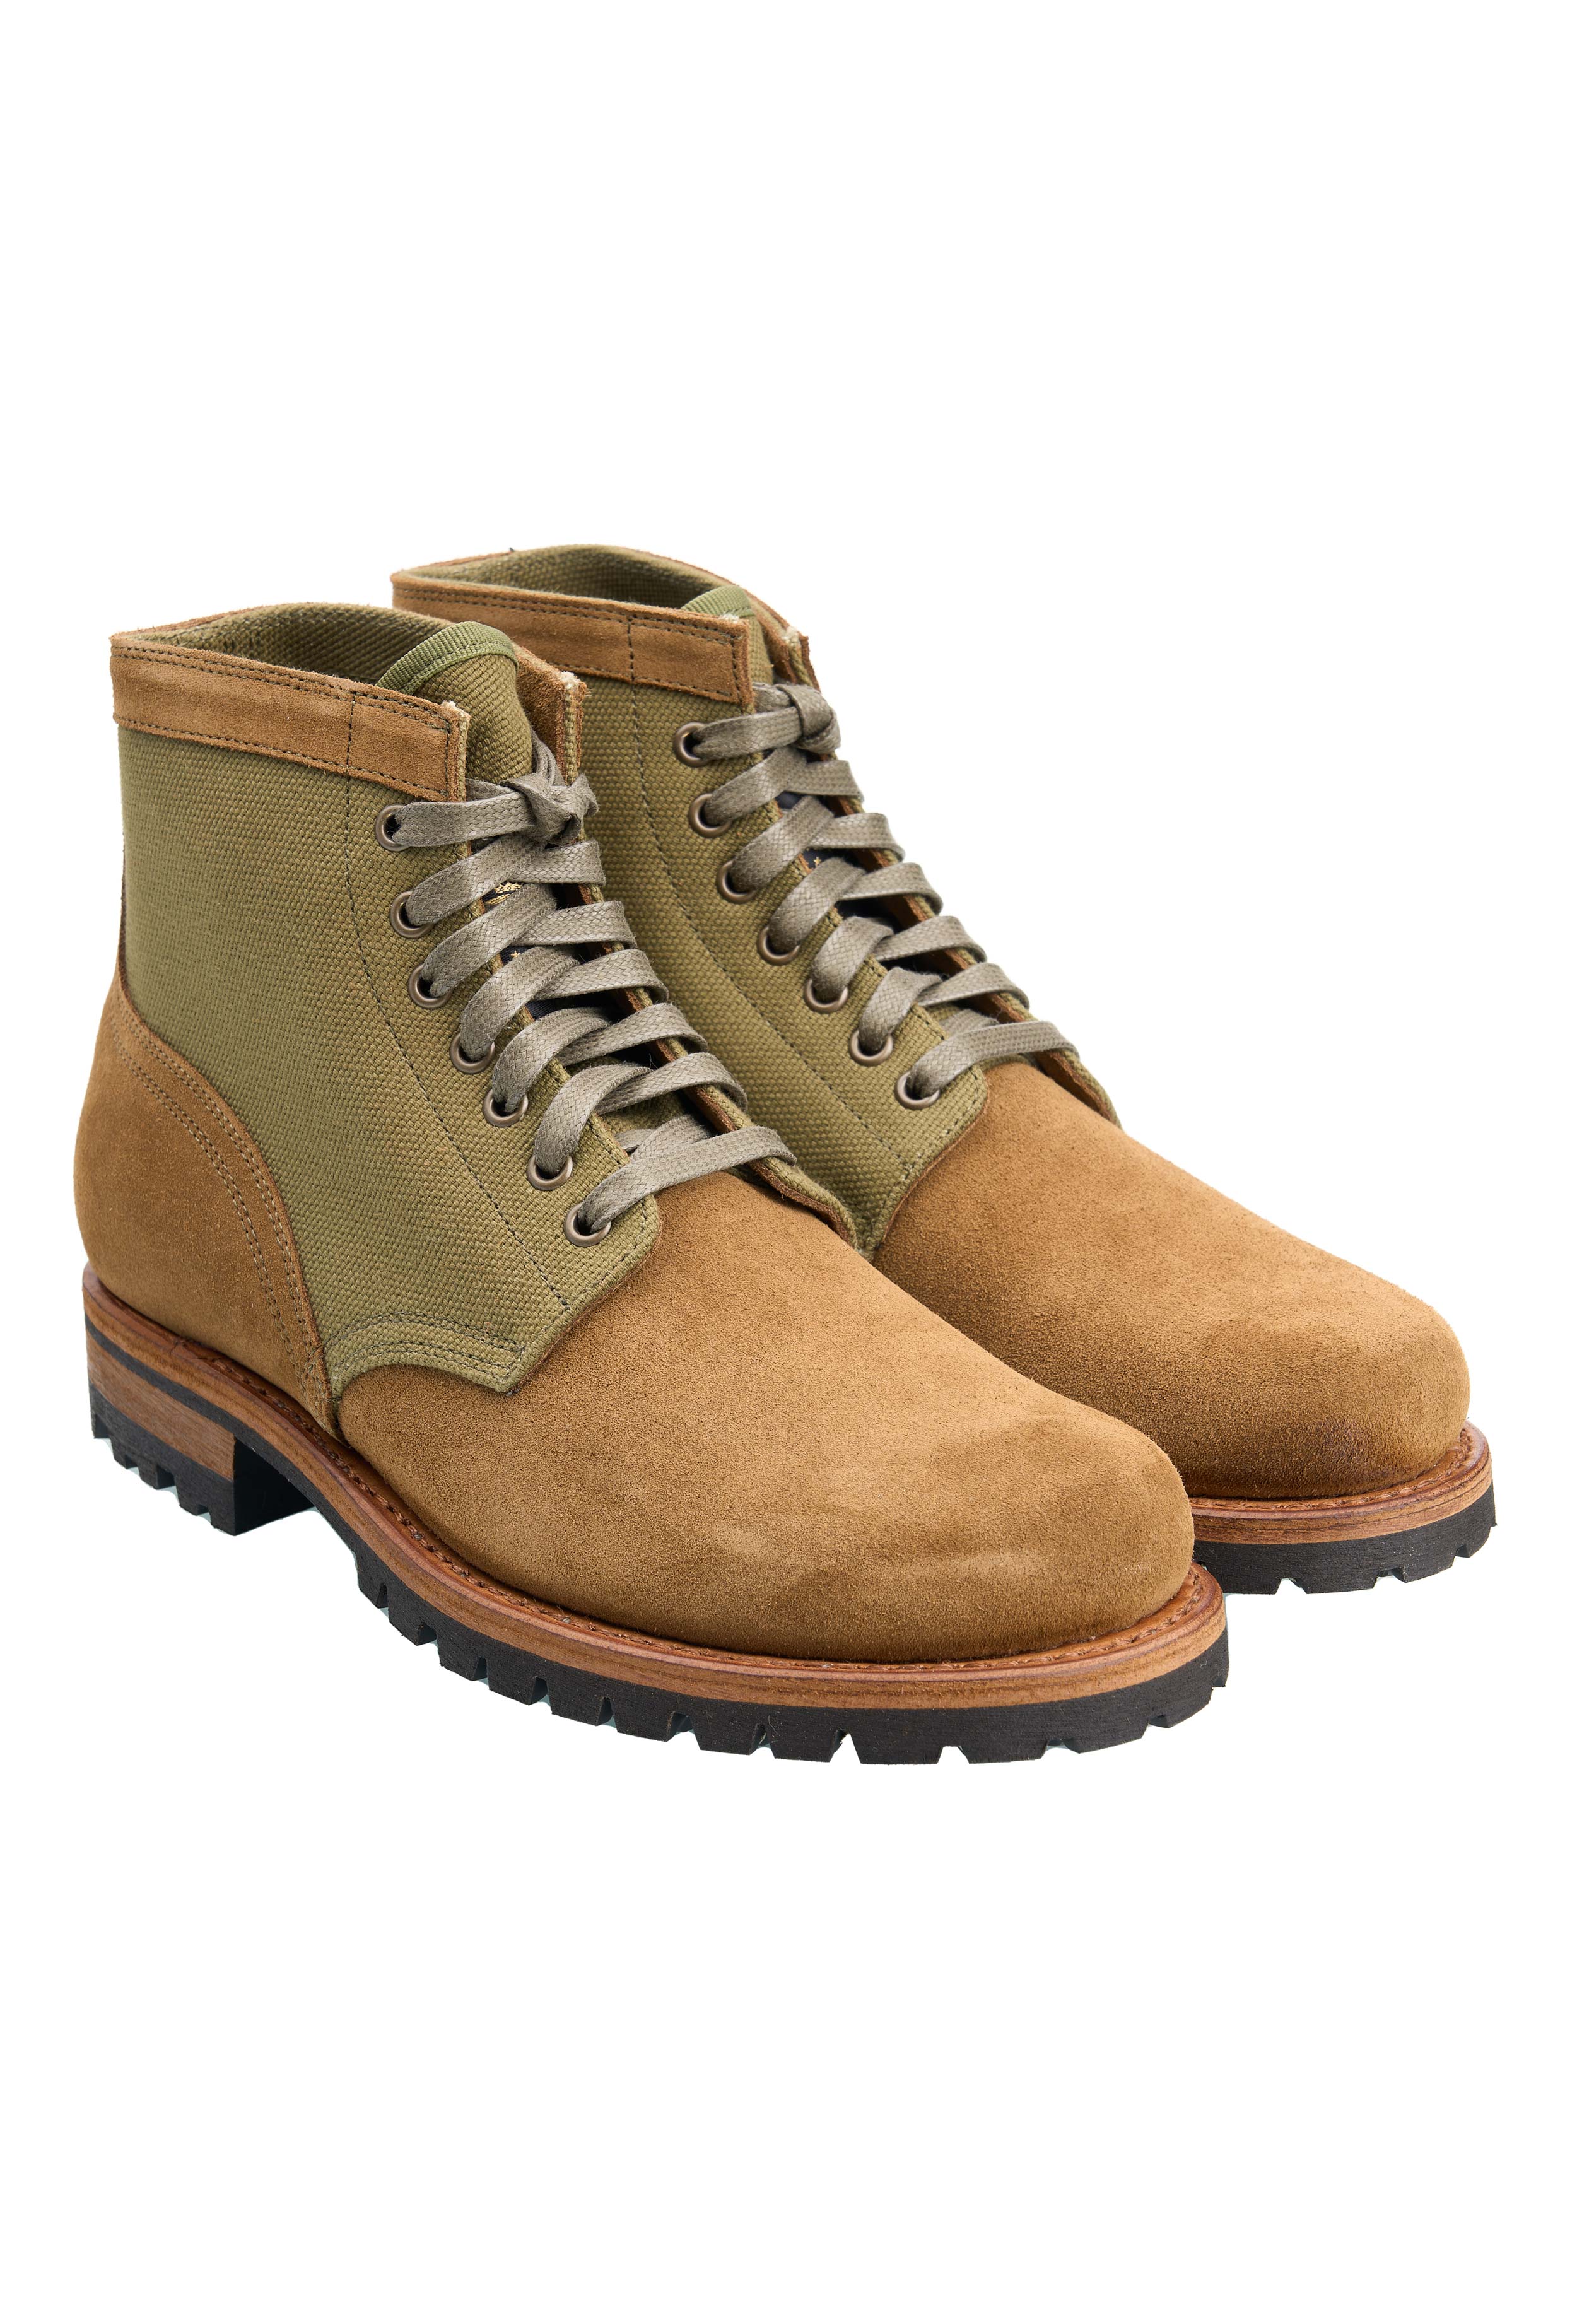 1952 Lowkinawa Boots rough-out